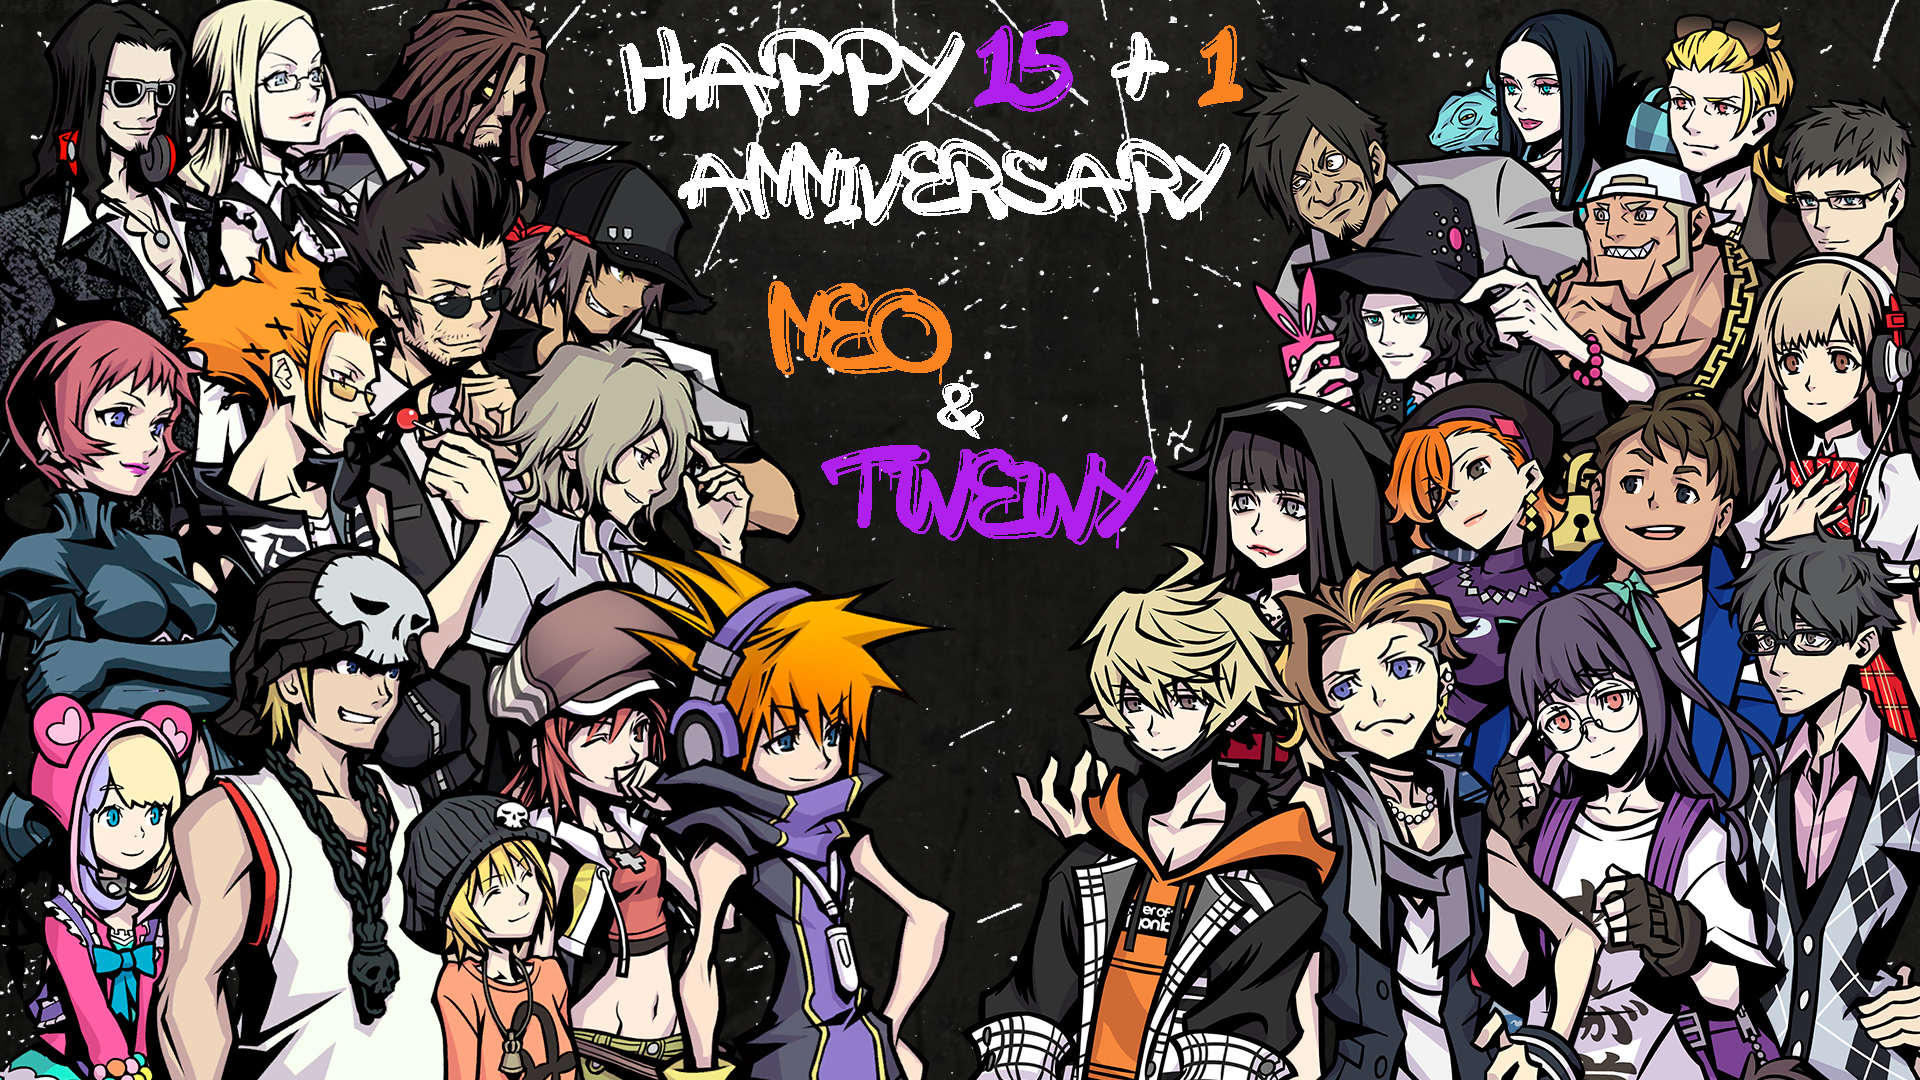 General 1920x1080 The World Ends With You graffiti NEO: The World Ends With You anniversary collage video game characters